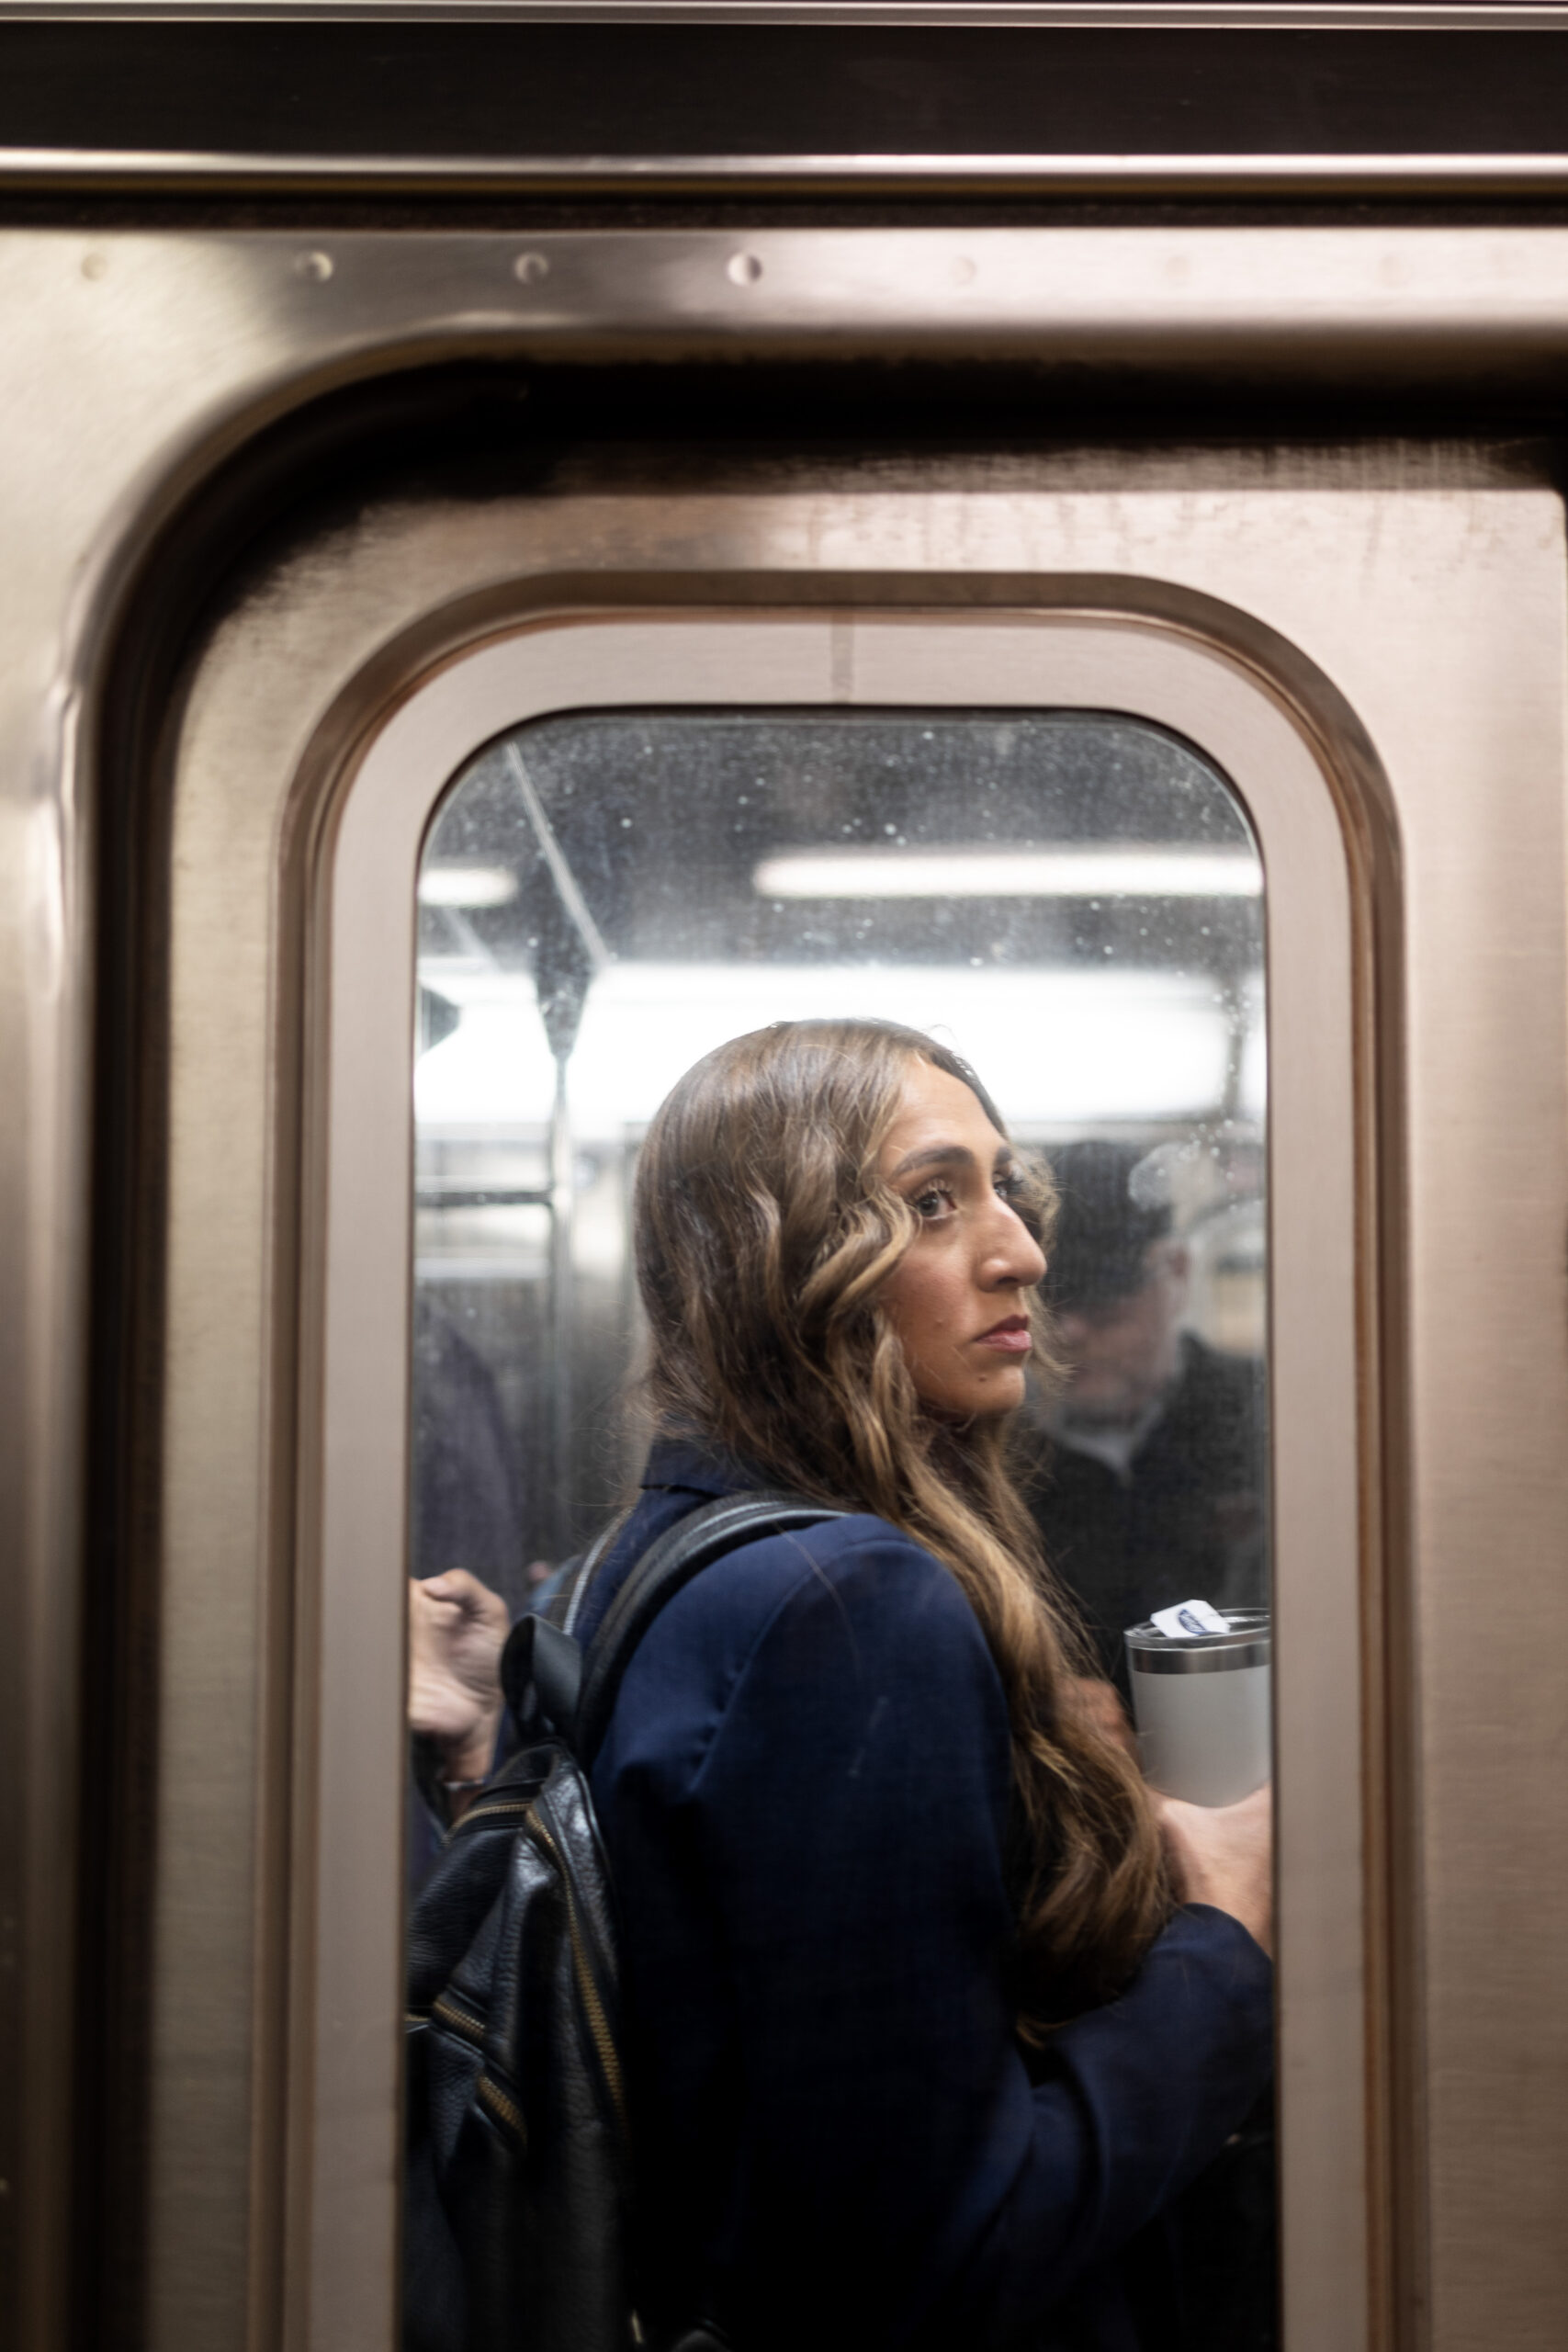 A woman looks into the distance from inside a subway car as she waits for the subway doors to open. She is holding an yeti and wearing a blue blazer. Her profile is framed by the subway door and illuminated by the luminescent lights from above.